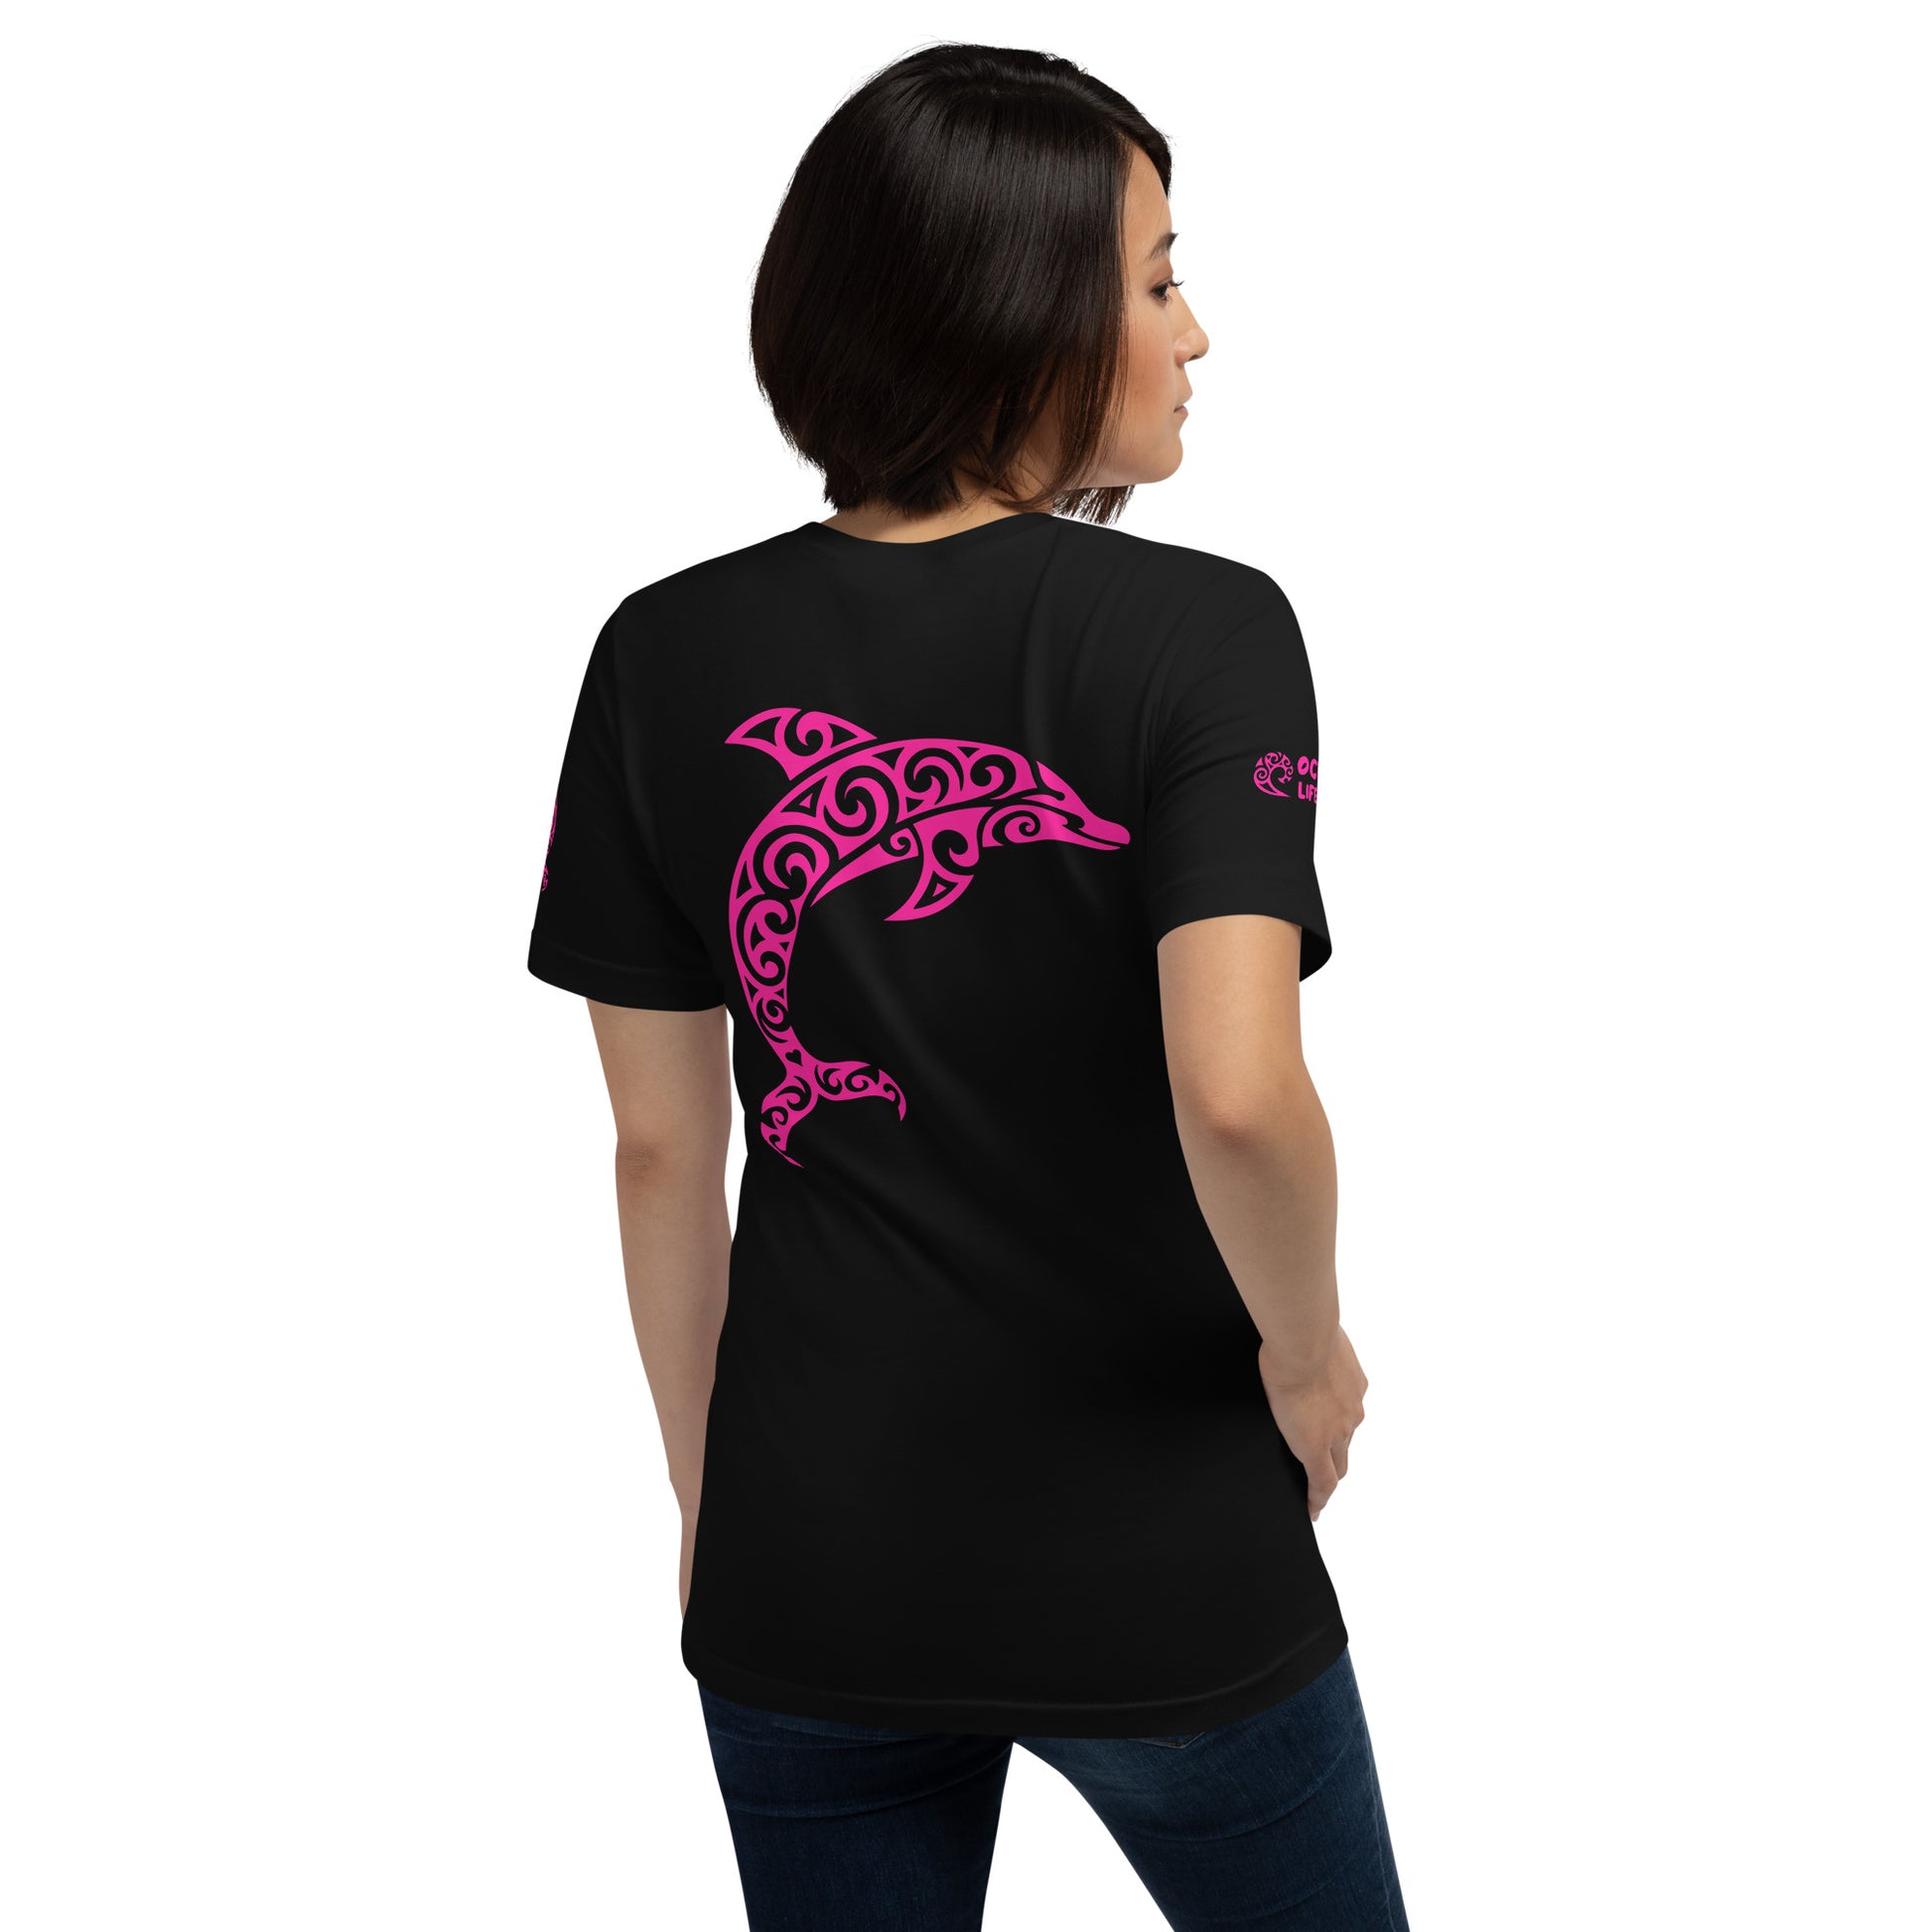 Polynesian Dolphin T-shirt For Men and Women Back Pink on Black